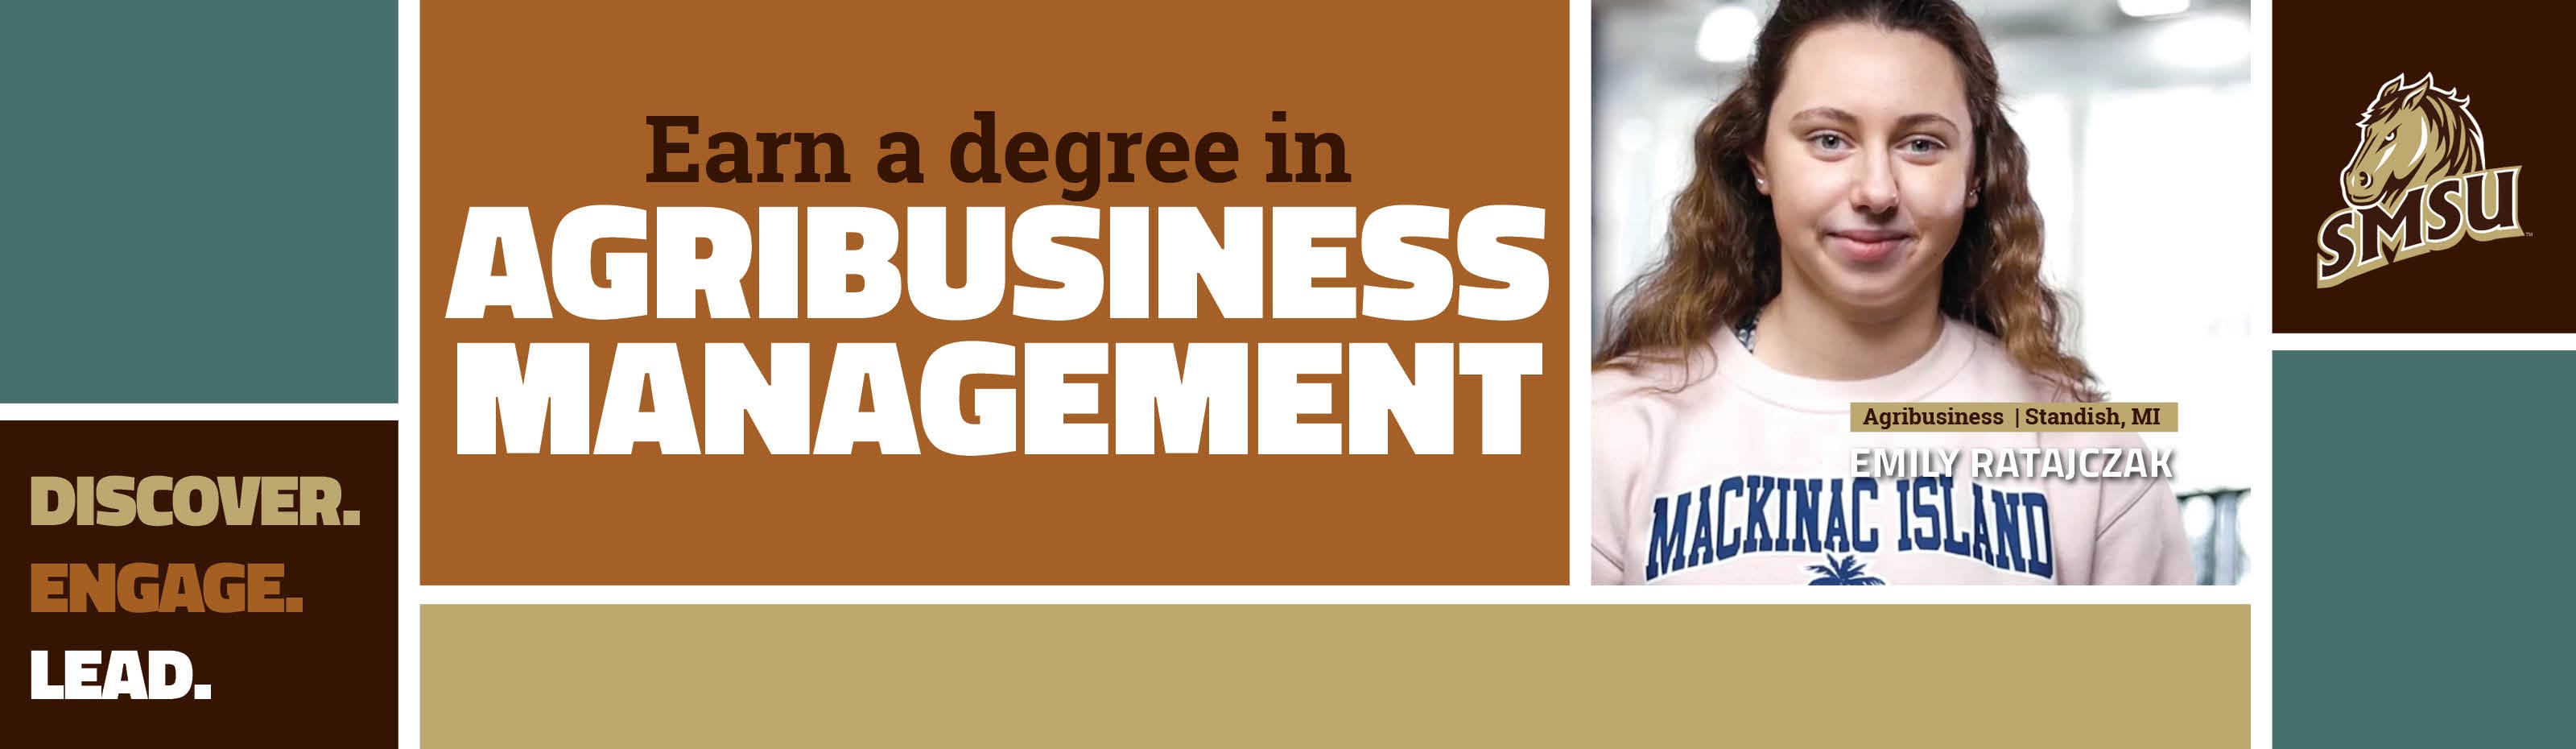 Earn A Degree In Agribusiness Management - Discover. Engage. Lead.